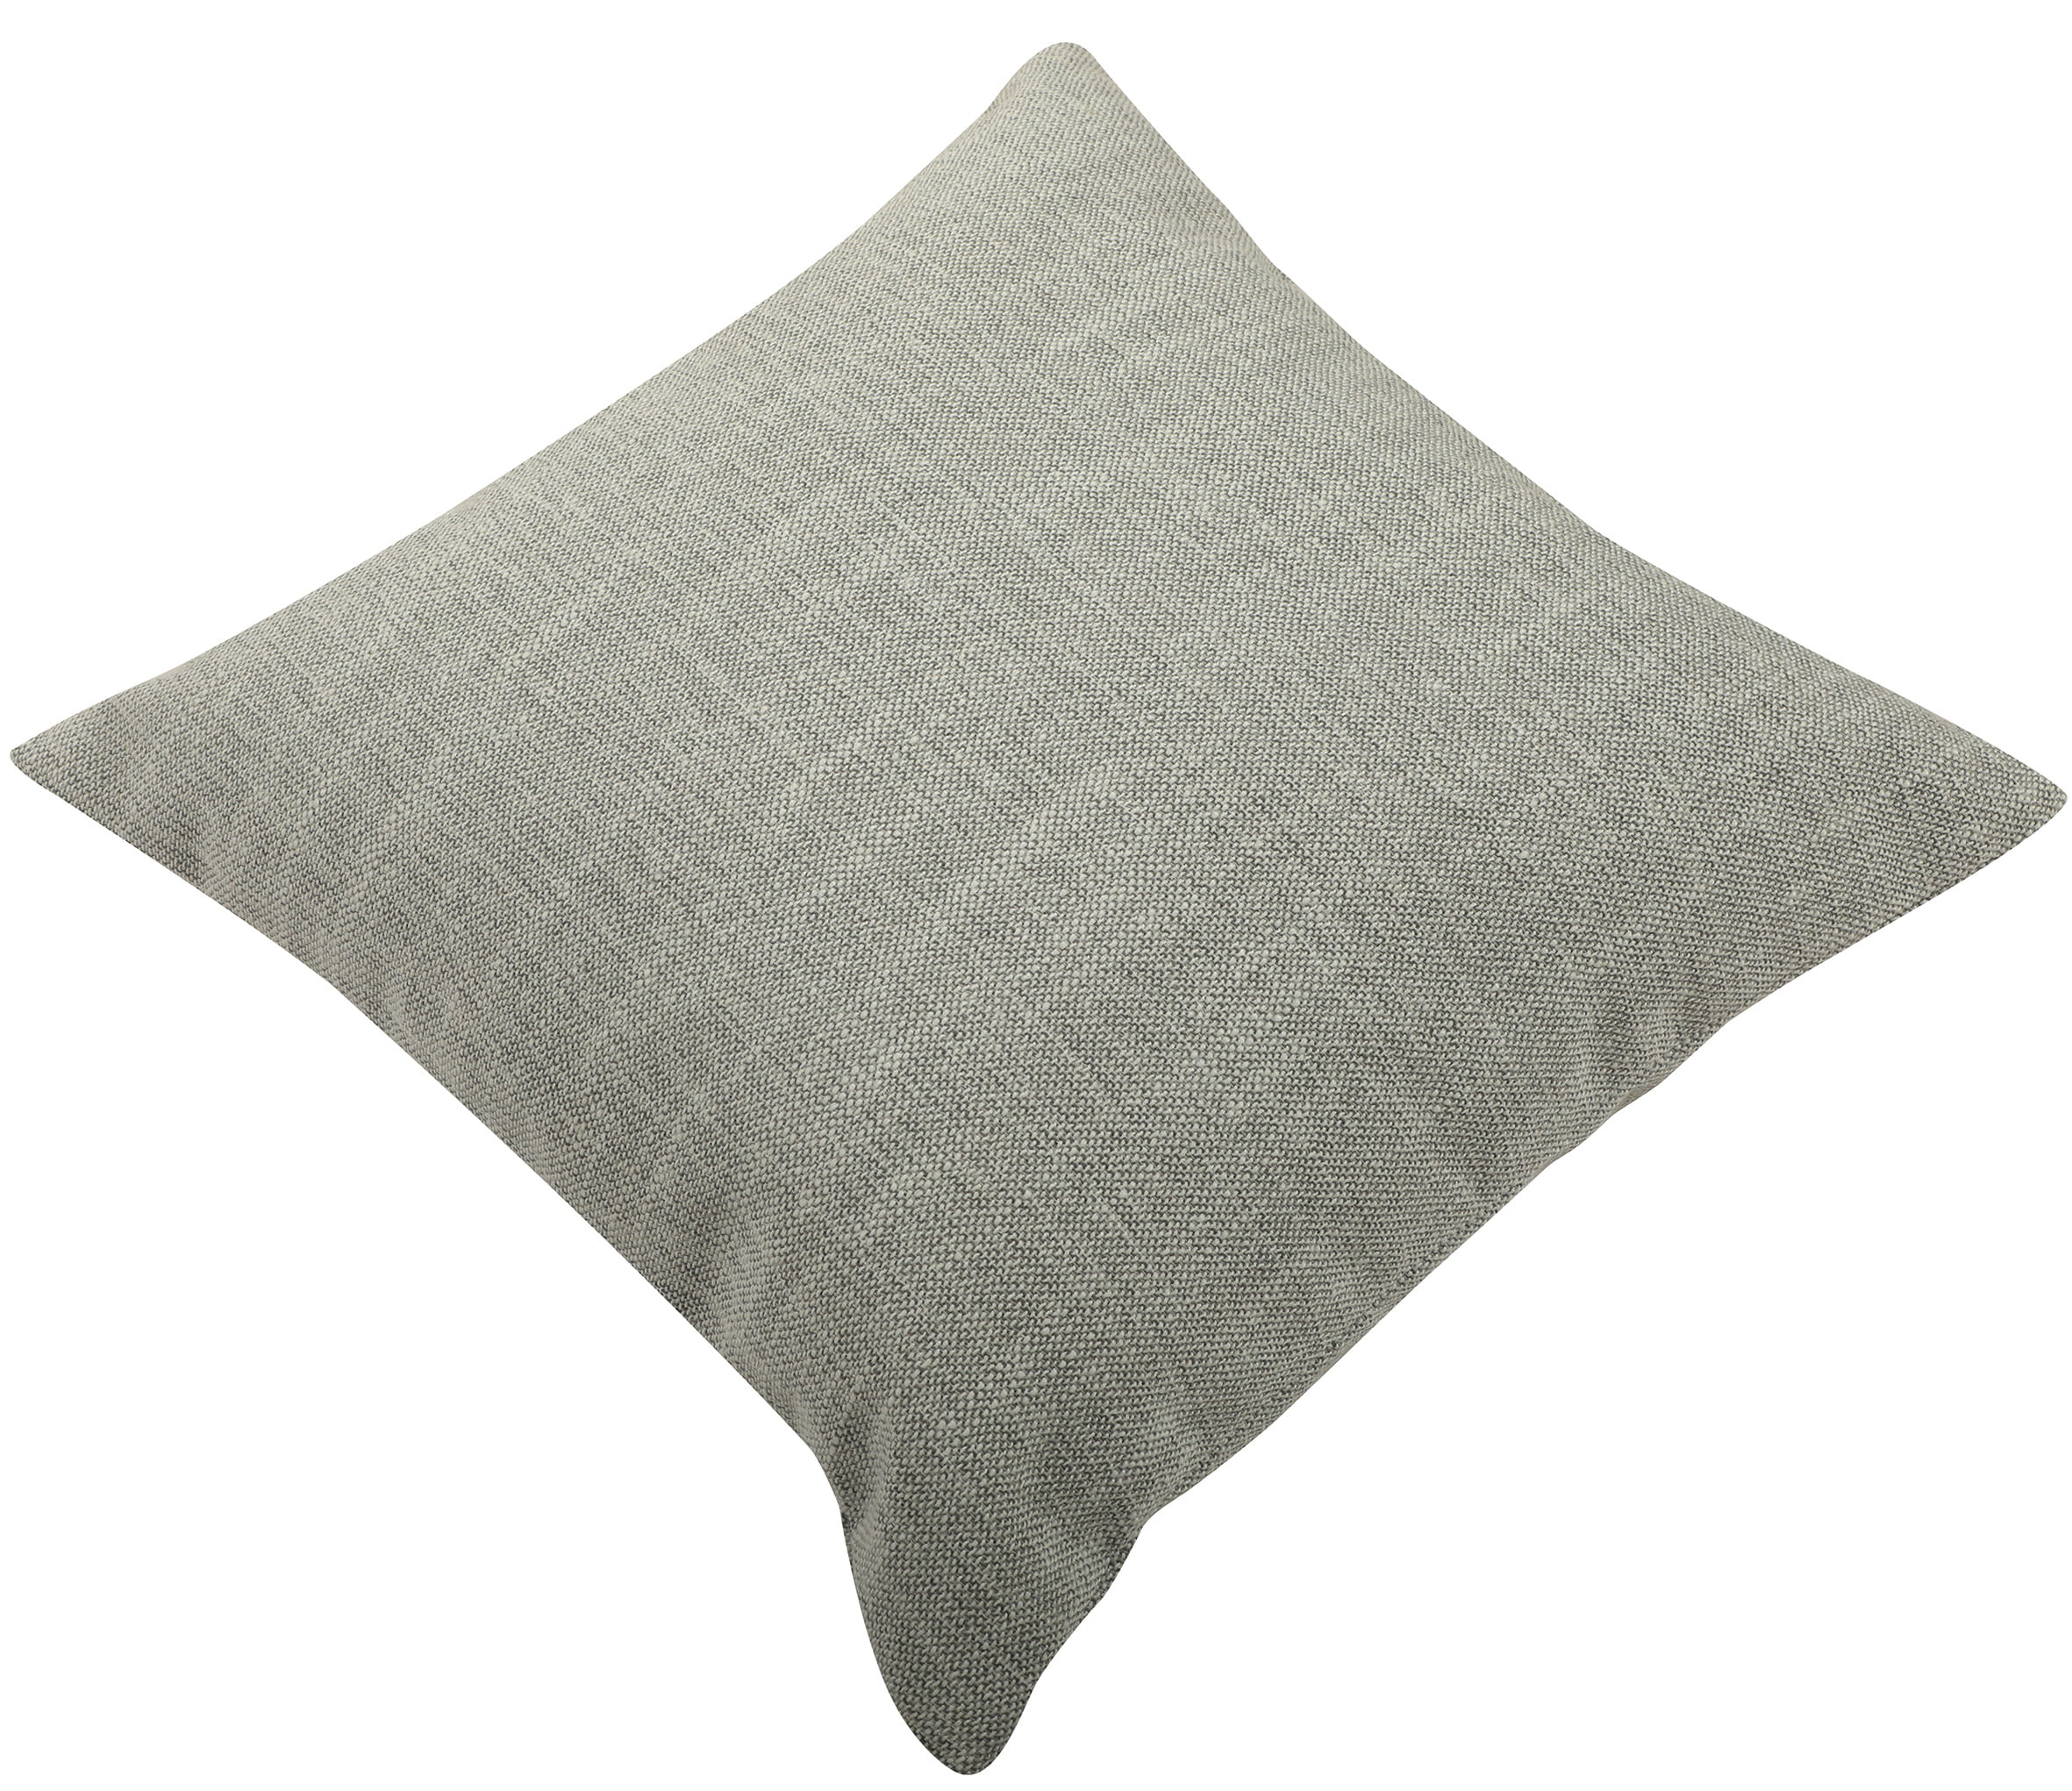 Decorative Pillows in Basketry Dove Gray Basket Weave Matelasse - Smal –